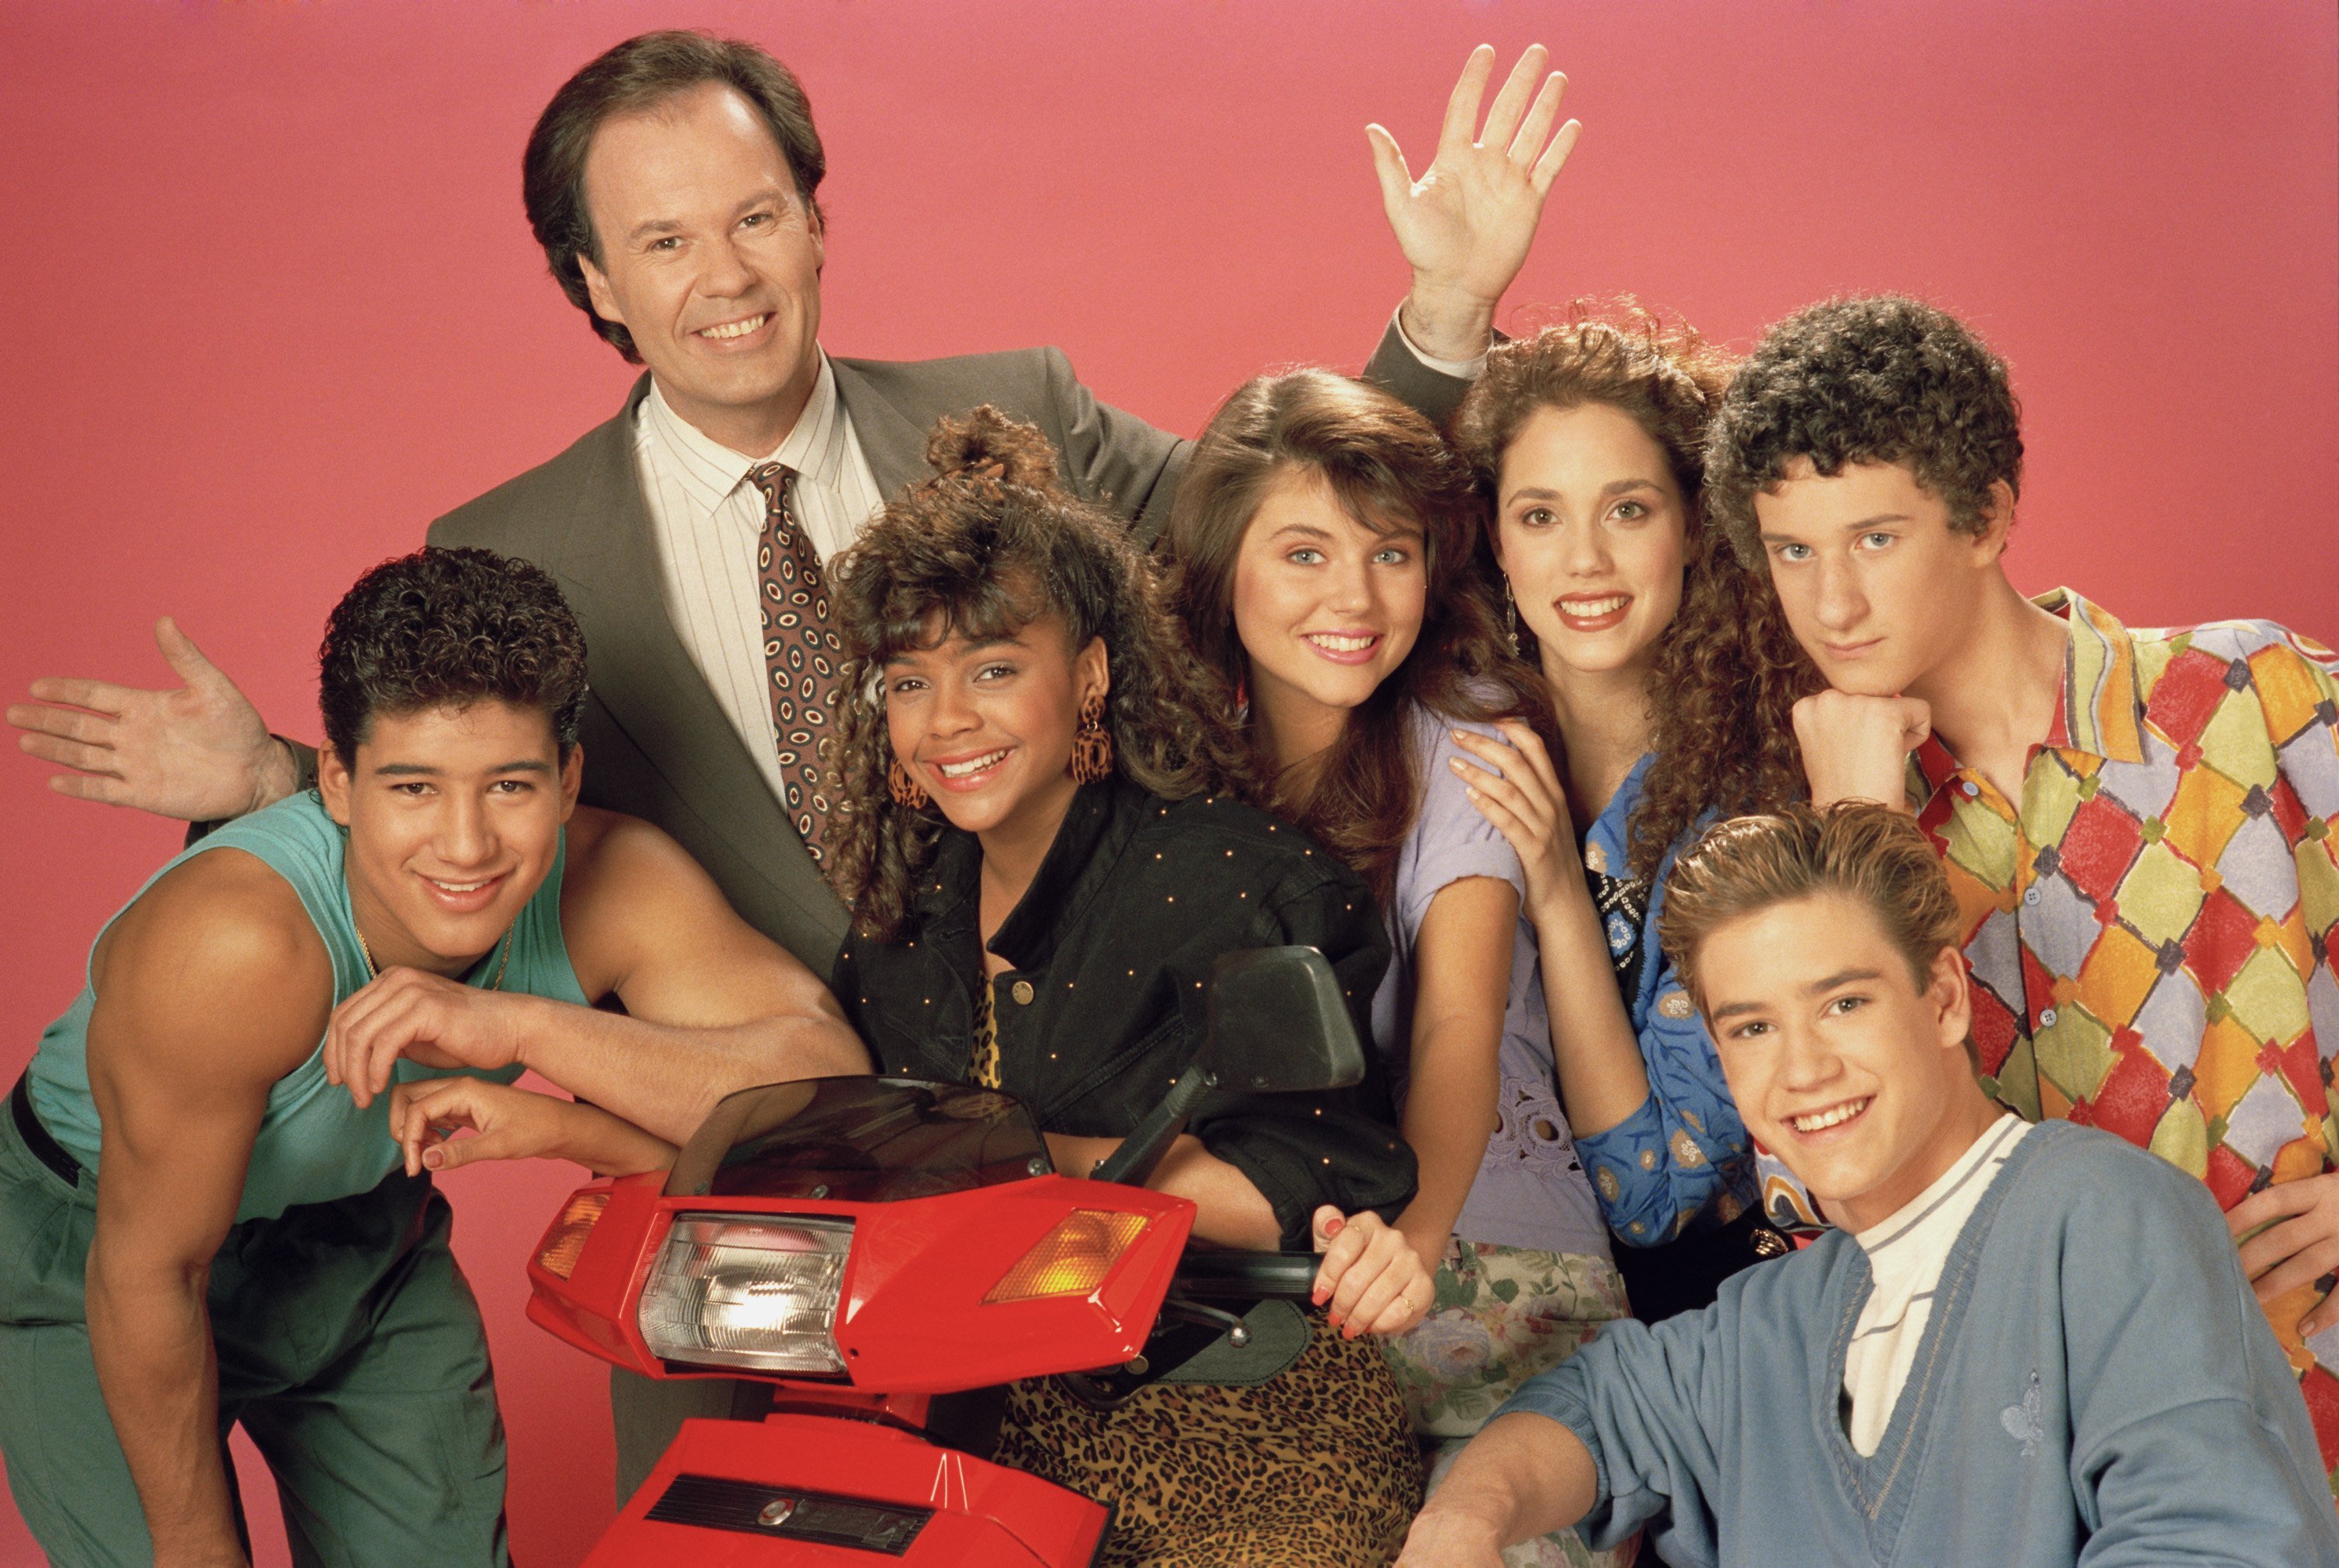 Why Dustin Diamond Only Remained in Contact With 2 of His ‘Saved by the Bell’ Co-Stars